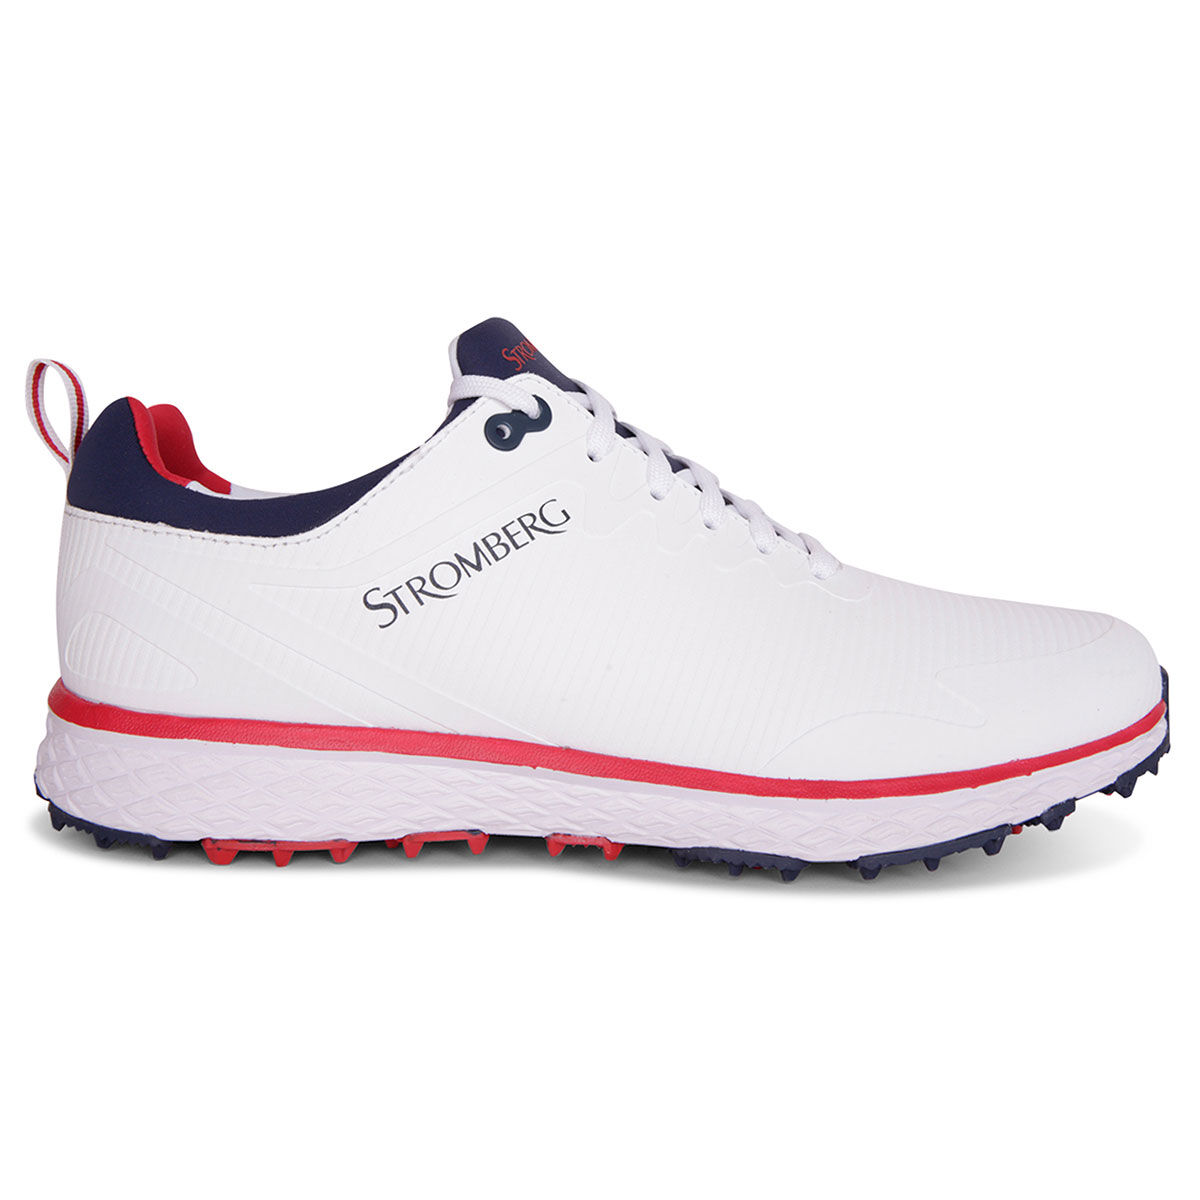 Stromberg Mens White, Red and Navy Blue Waterproof Tempo Spikeless Golf Shoes, Size: 10  | American Golf von Stromberg